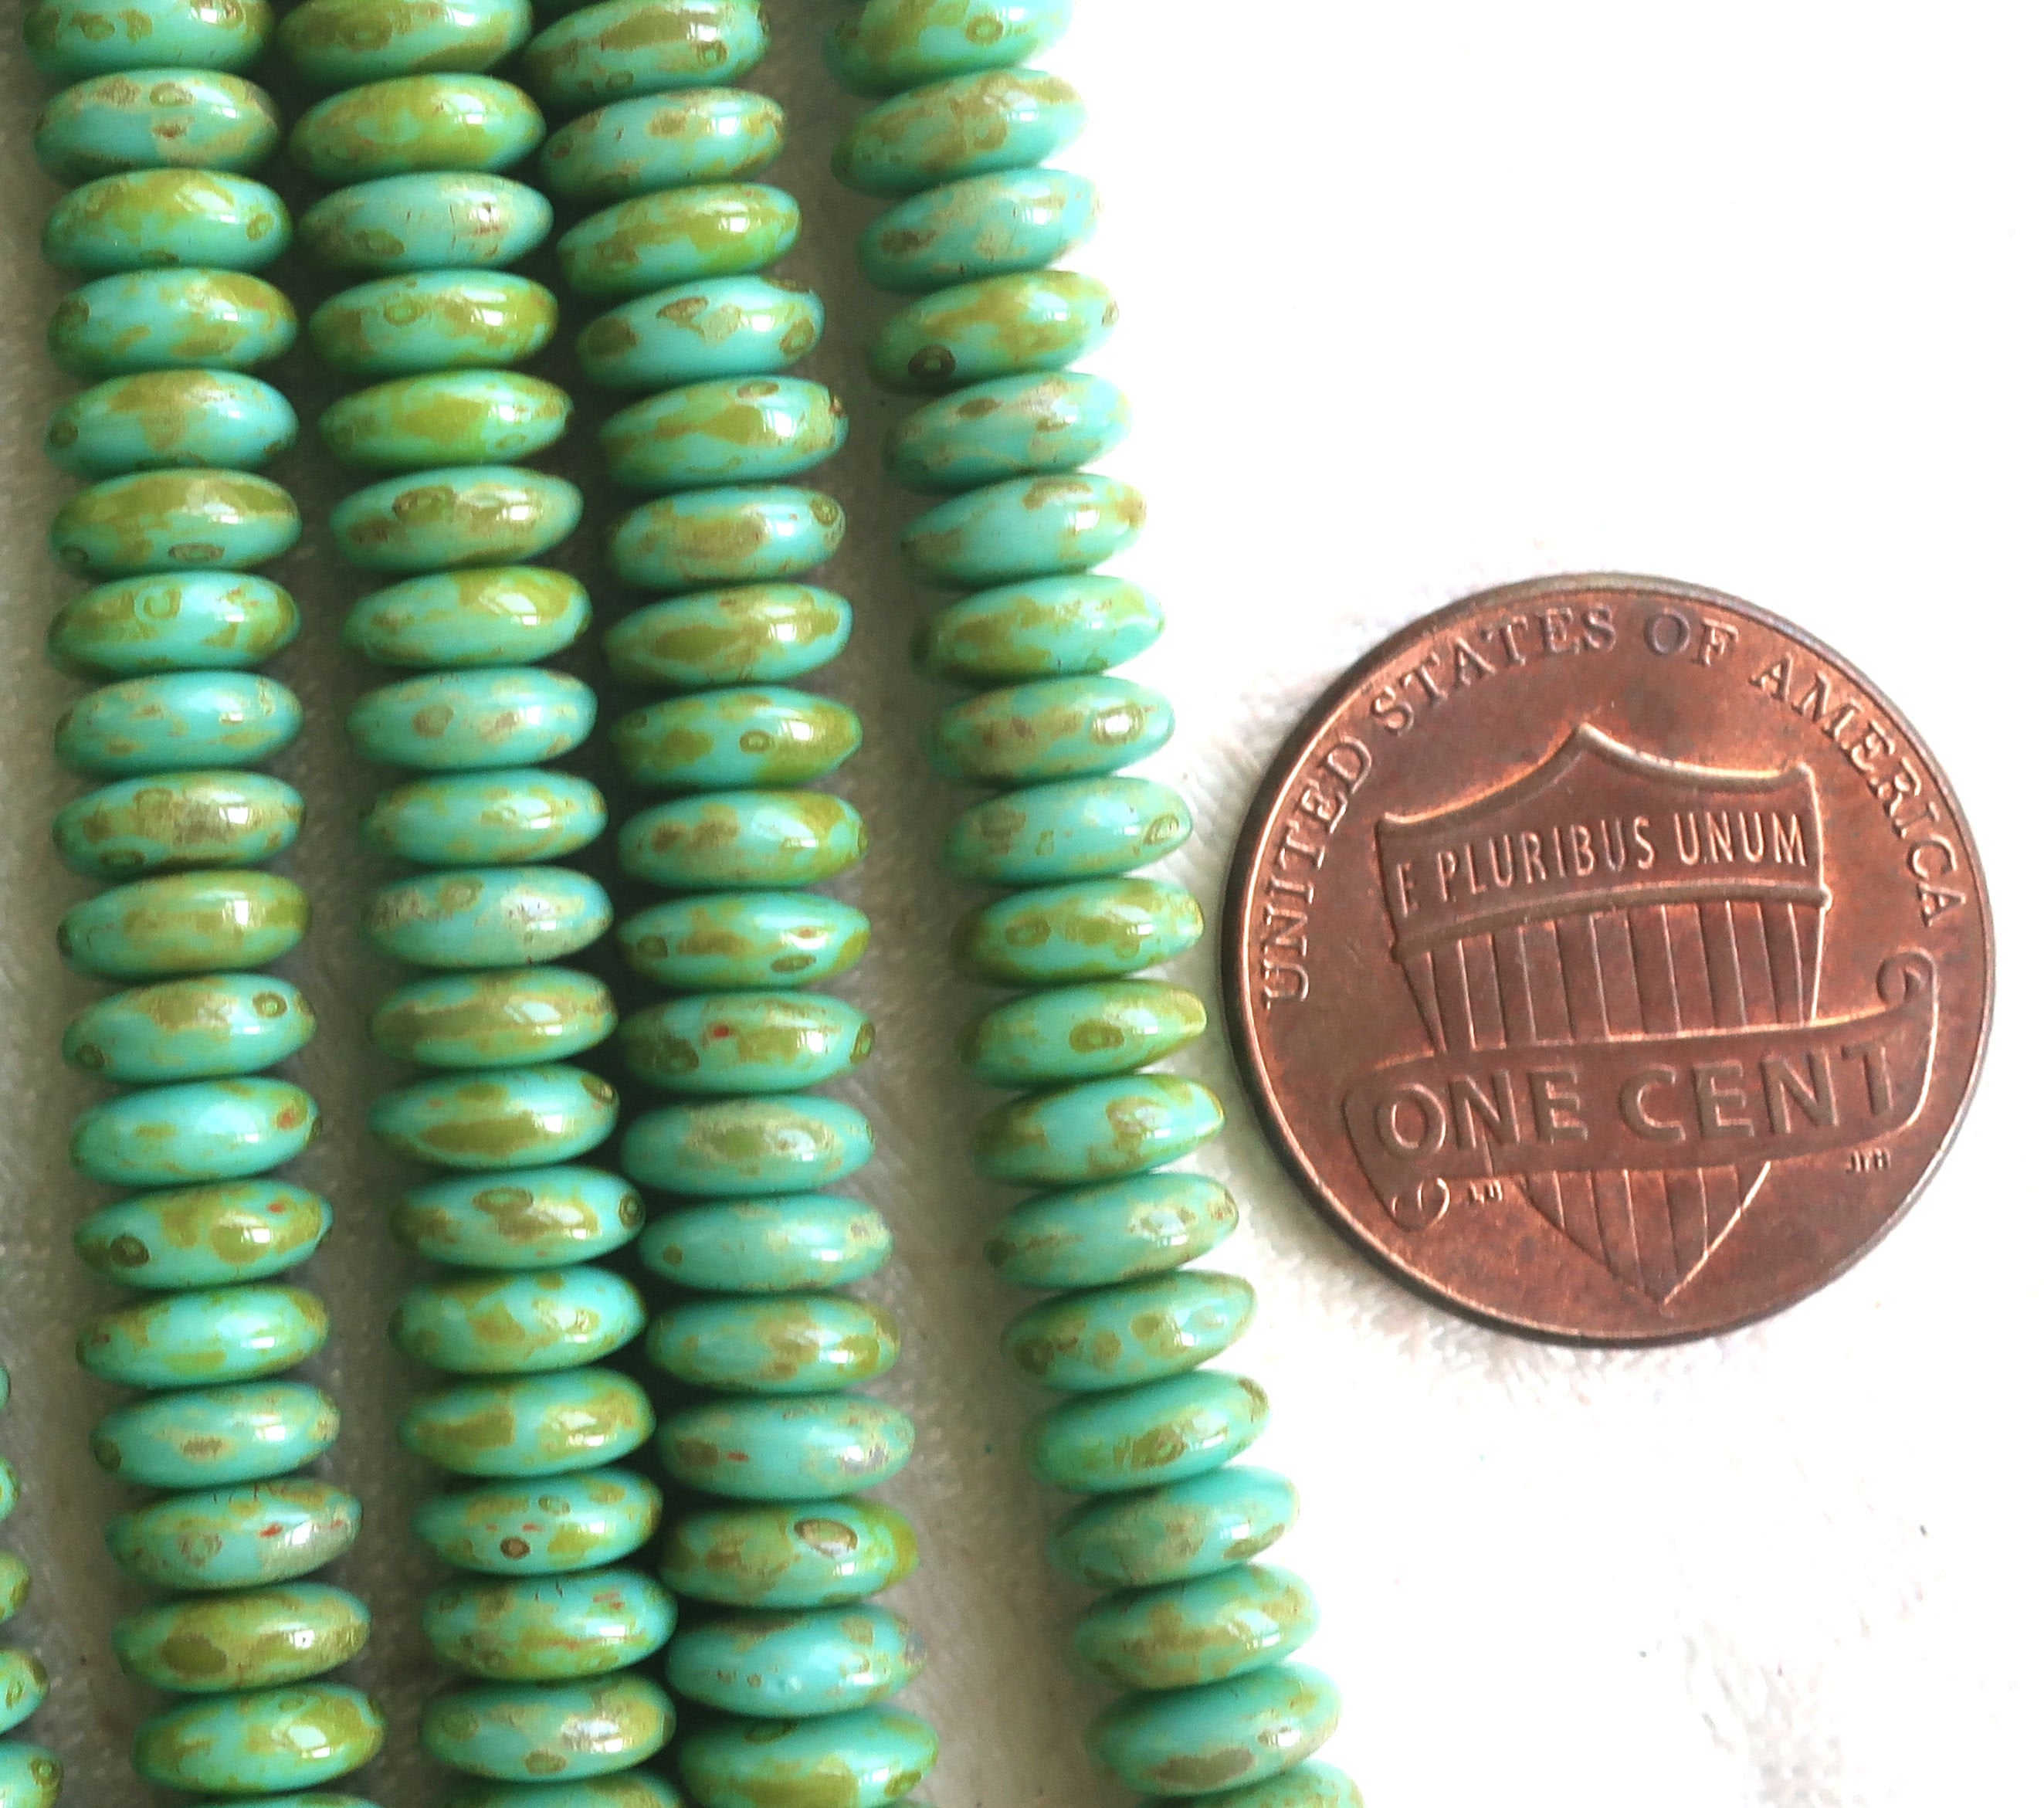 6mm Round Glass Beads - Opaque Blue Turquoise - 50 Beads